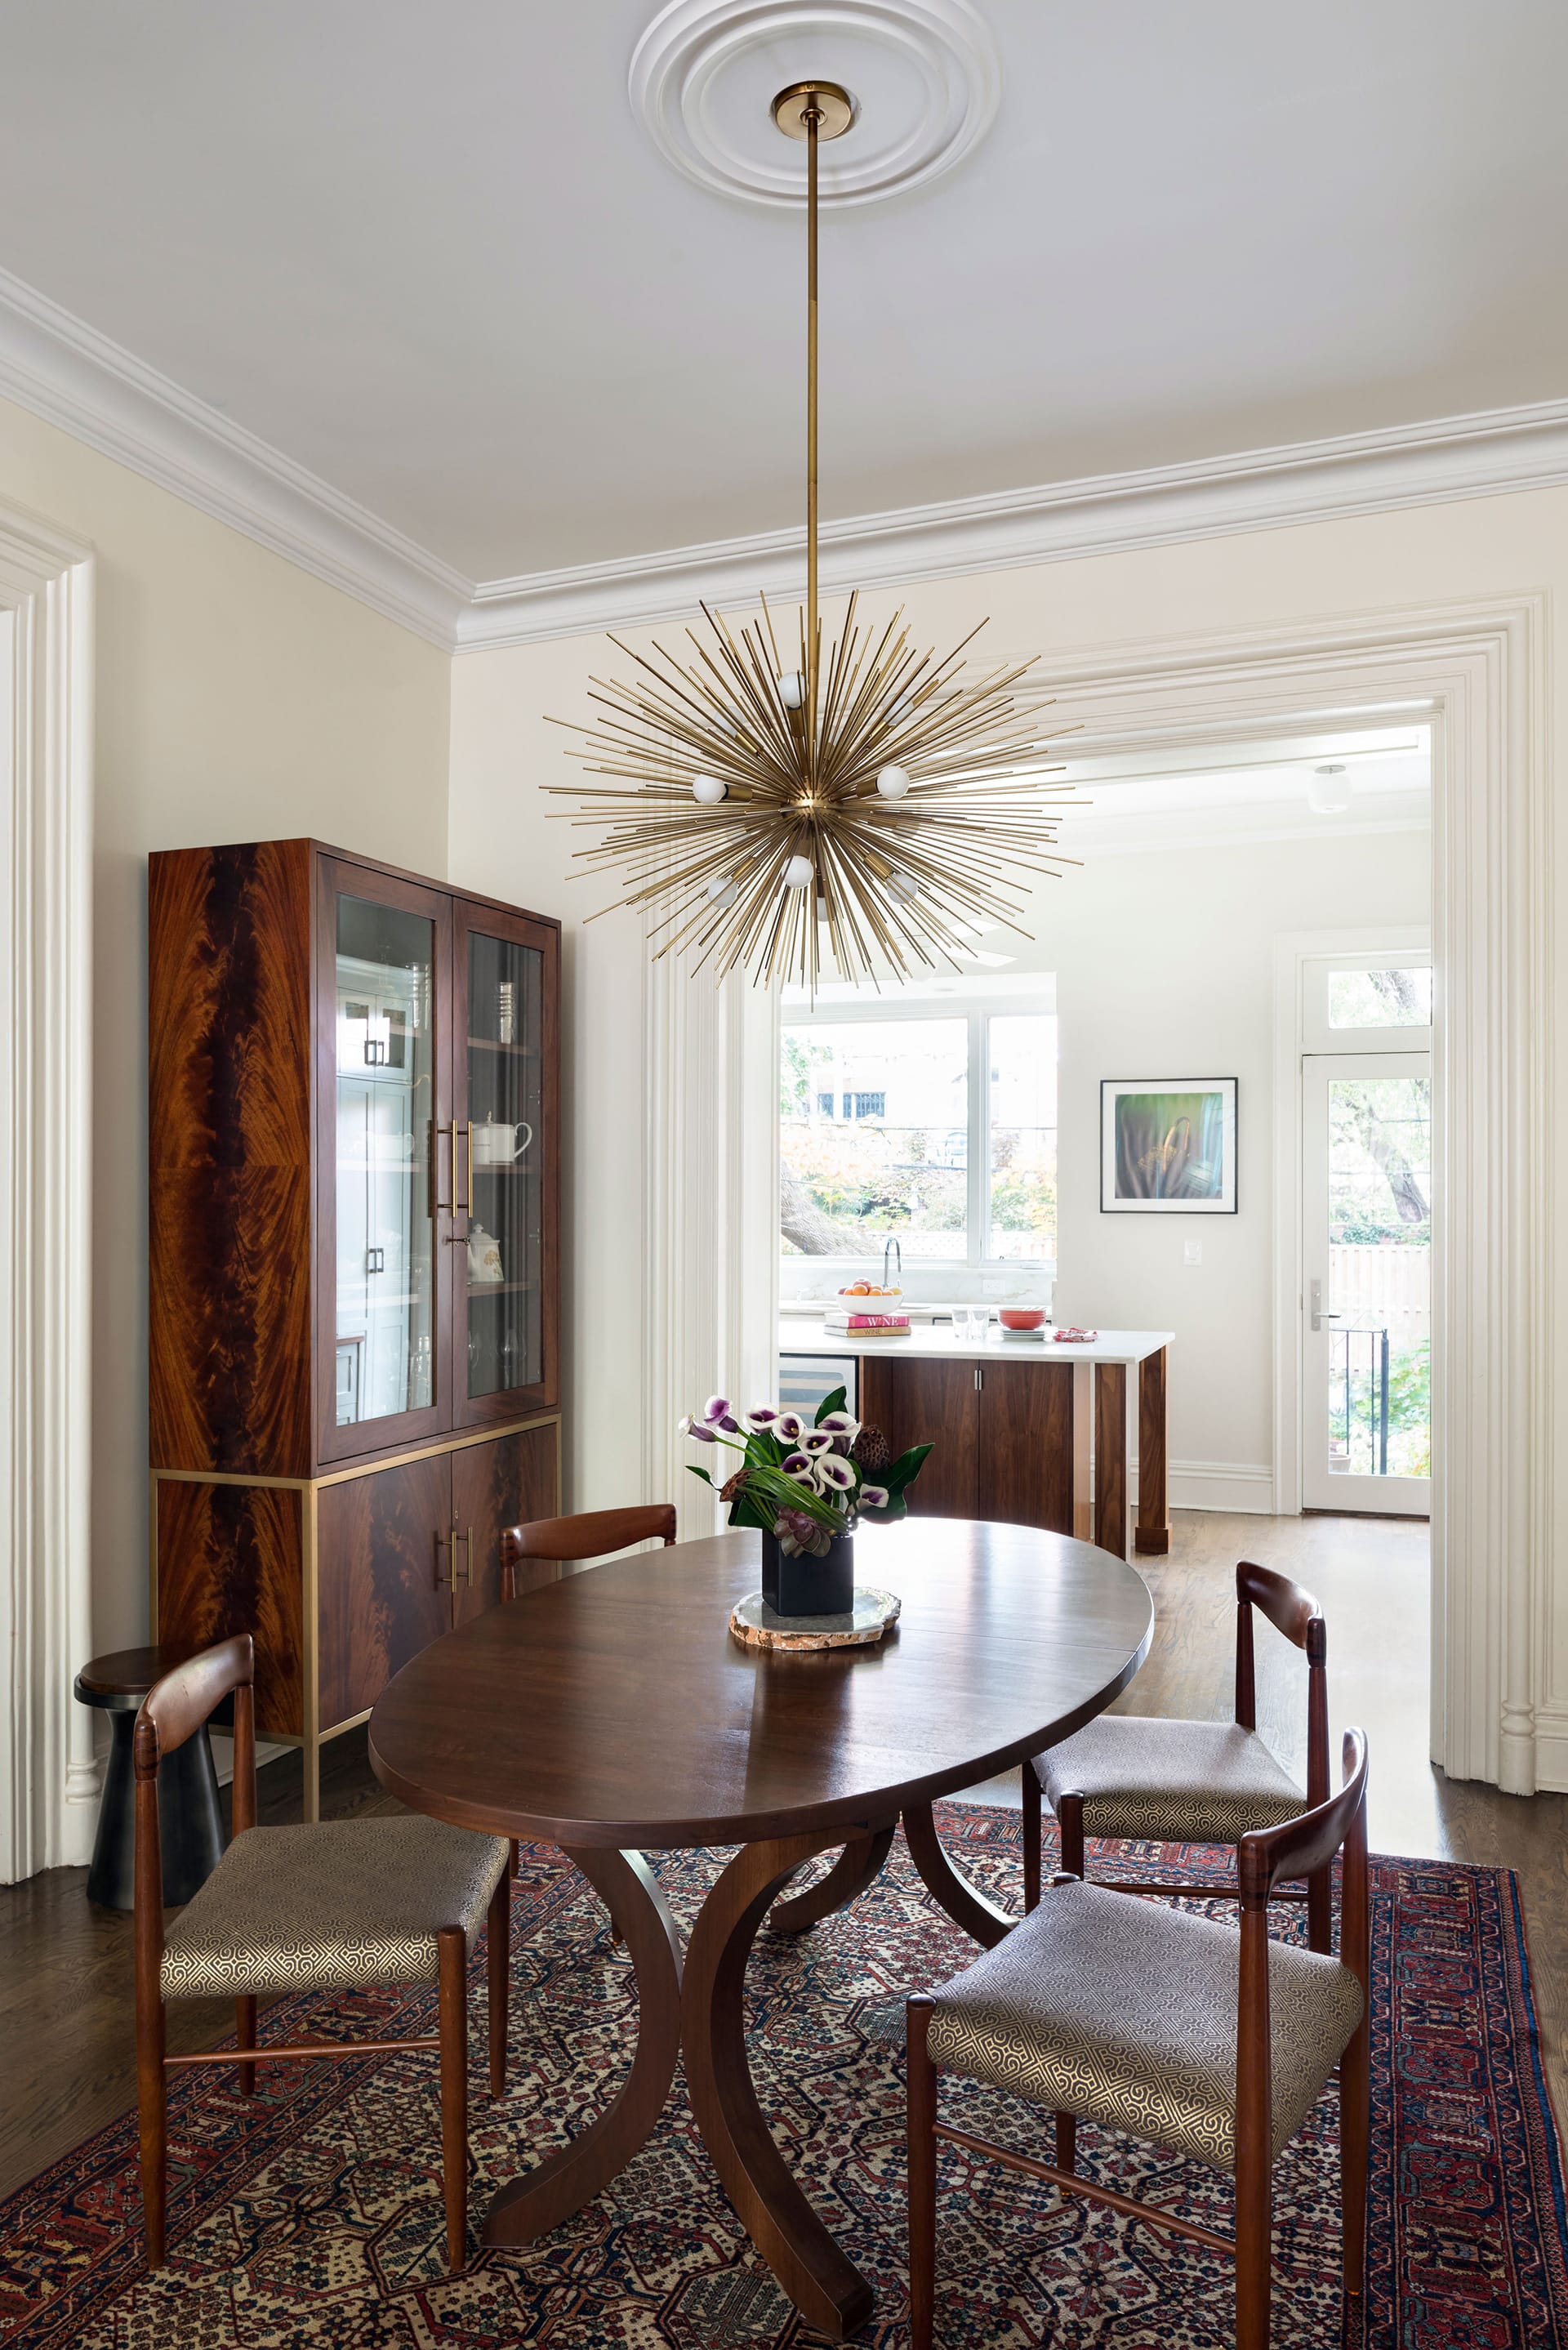 Dining room after our renovation, with increased natural light, new furnishings, and a statement light fixture